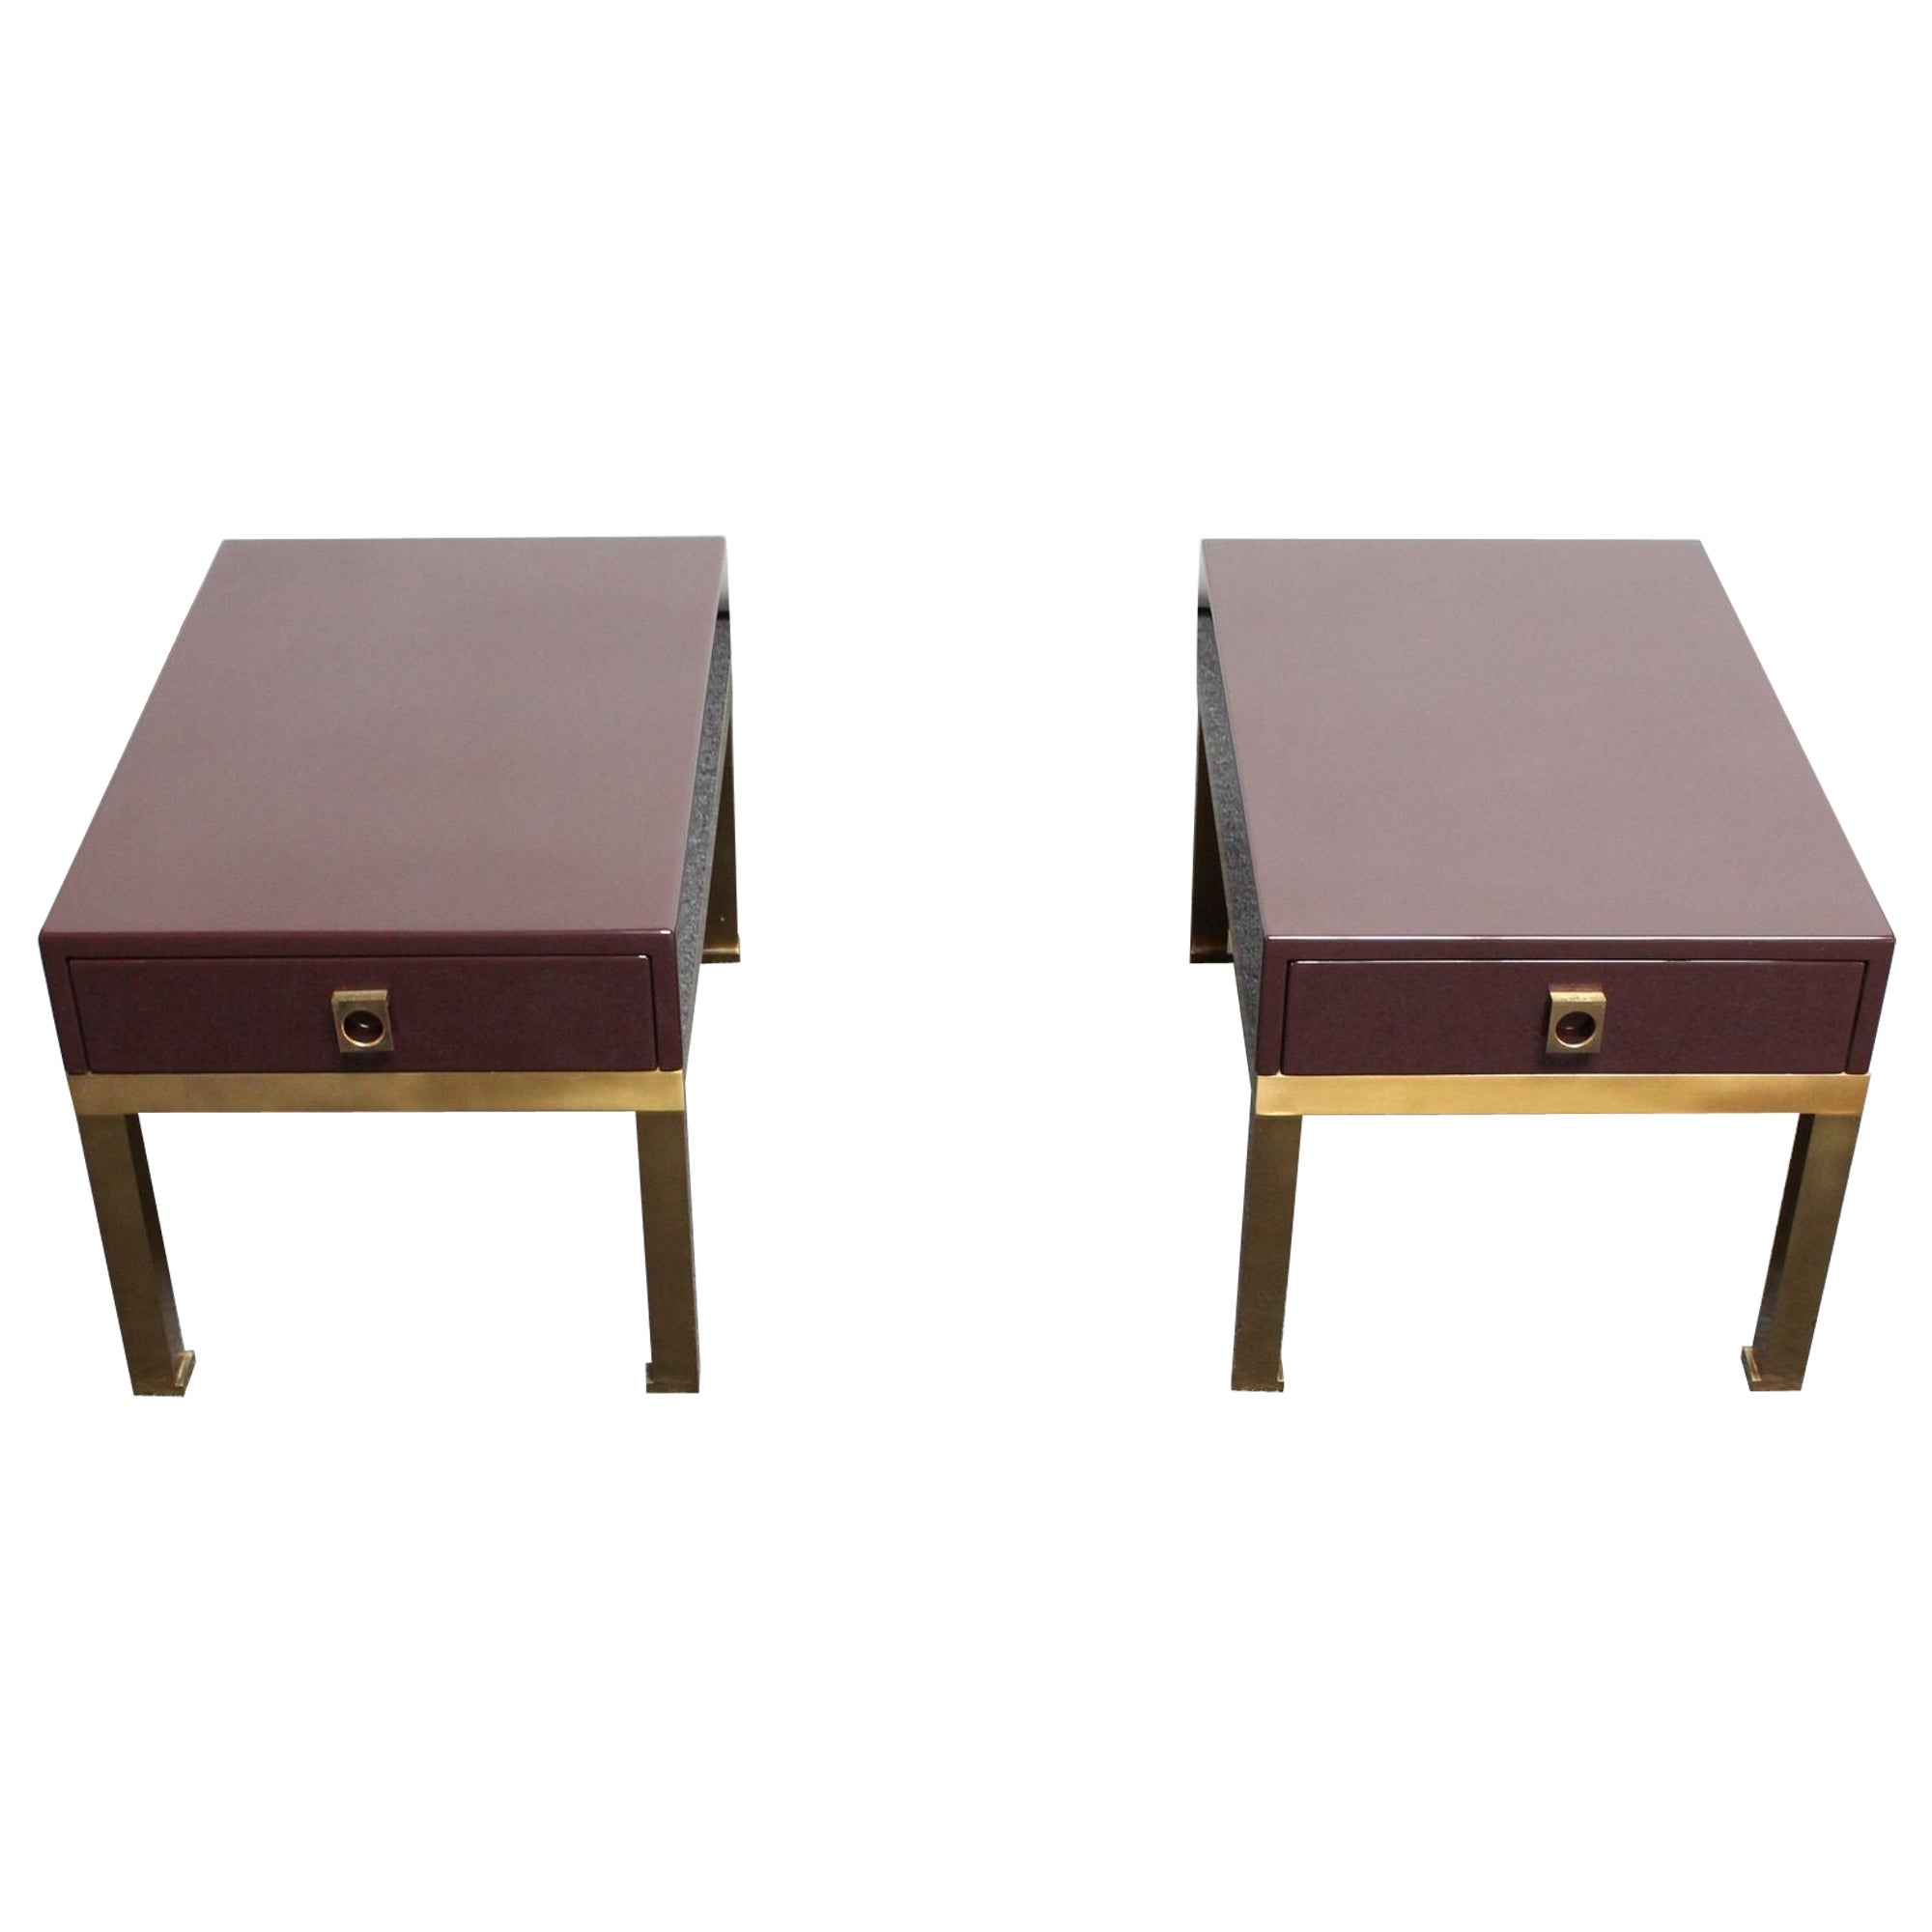 Pair of French Moderne Lacquered Mahogany and Brass Nightstands by Guy Lefèvre For Sale